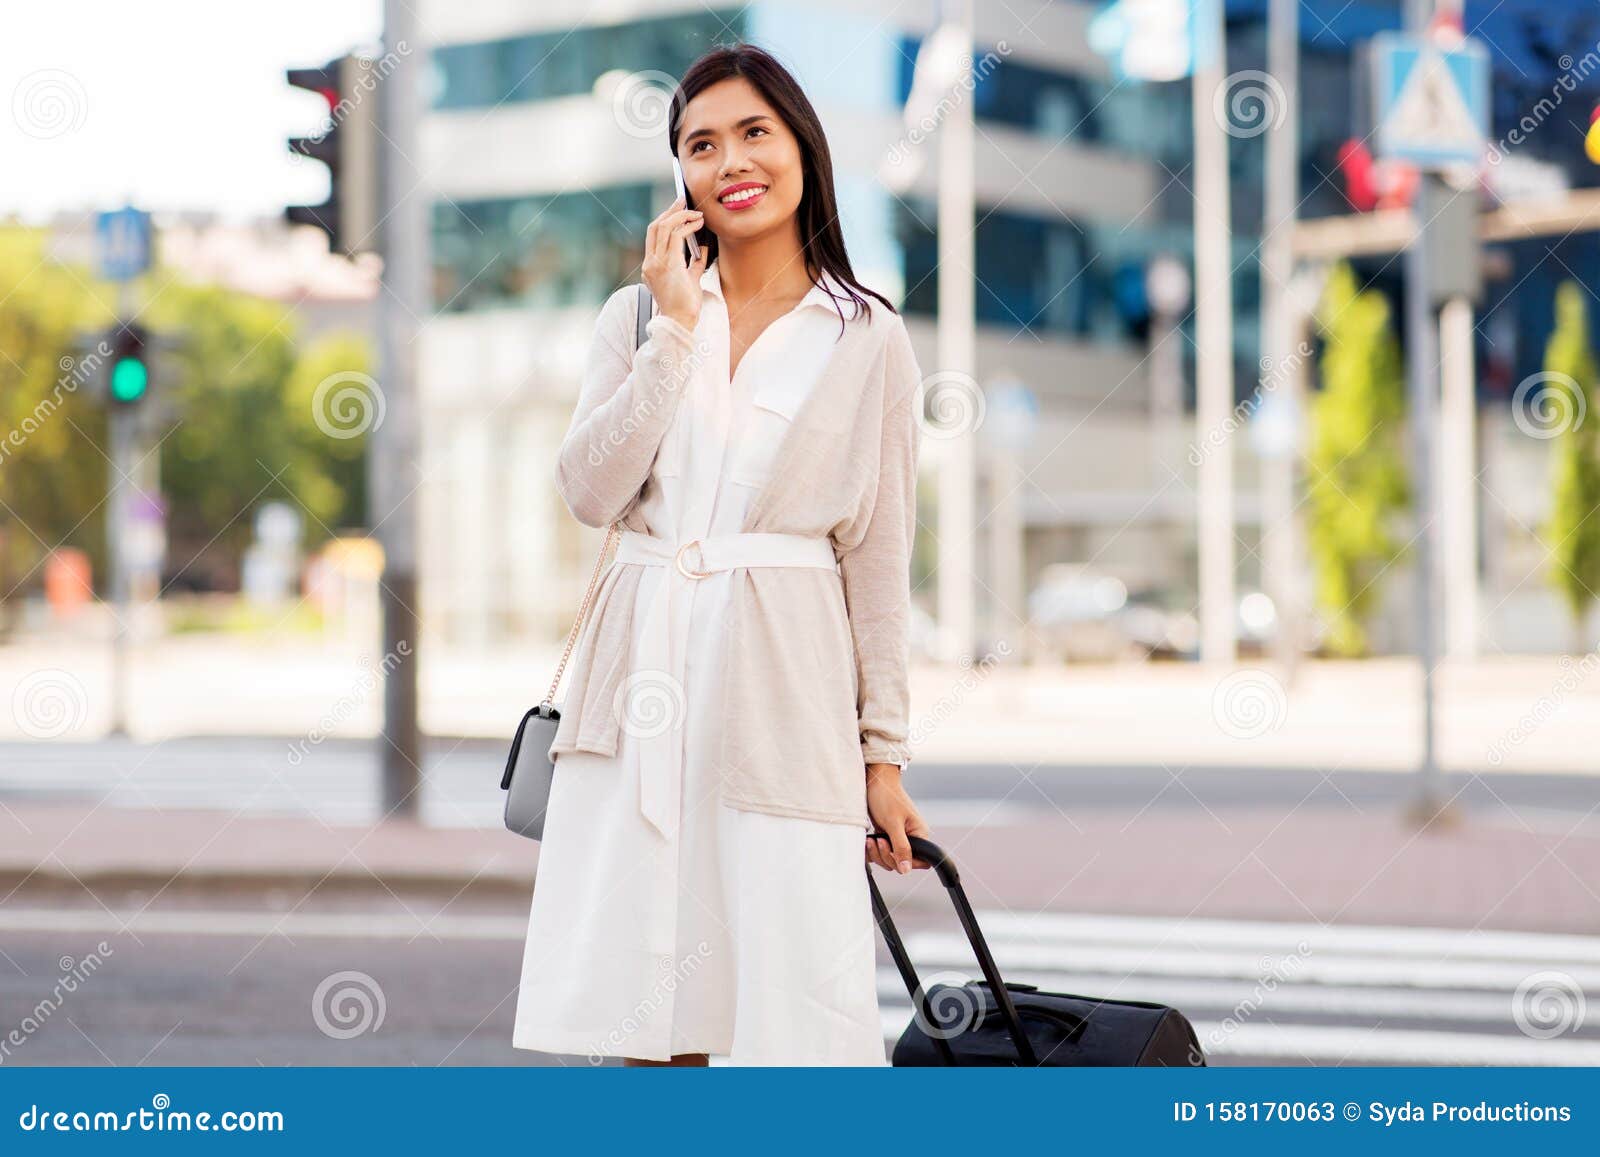 Woman with Travel Bag Calling on Cellphone in City Stock Image - Image ...